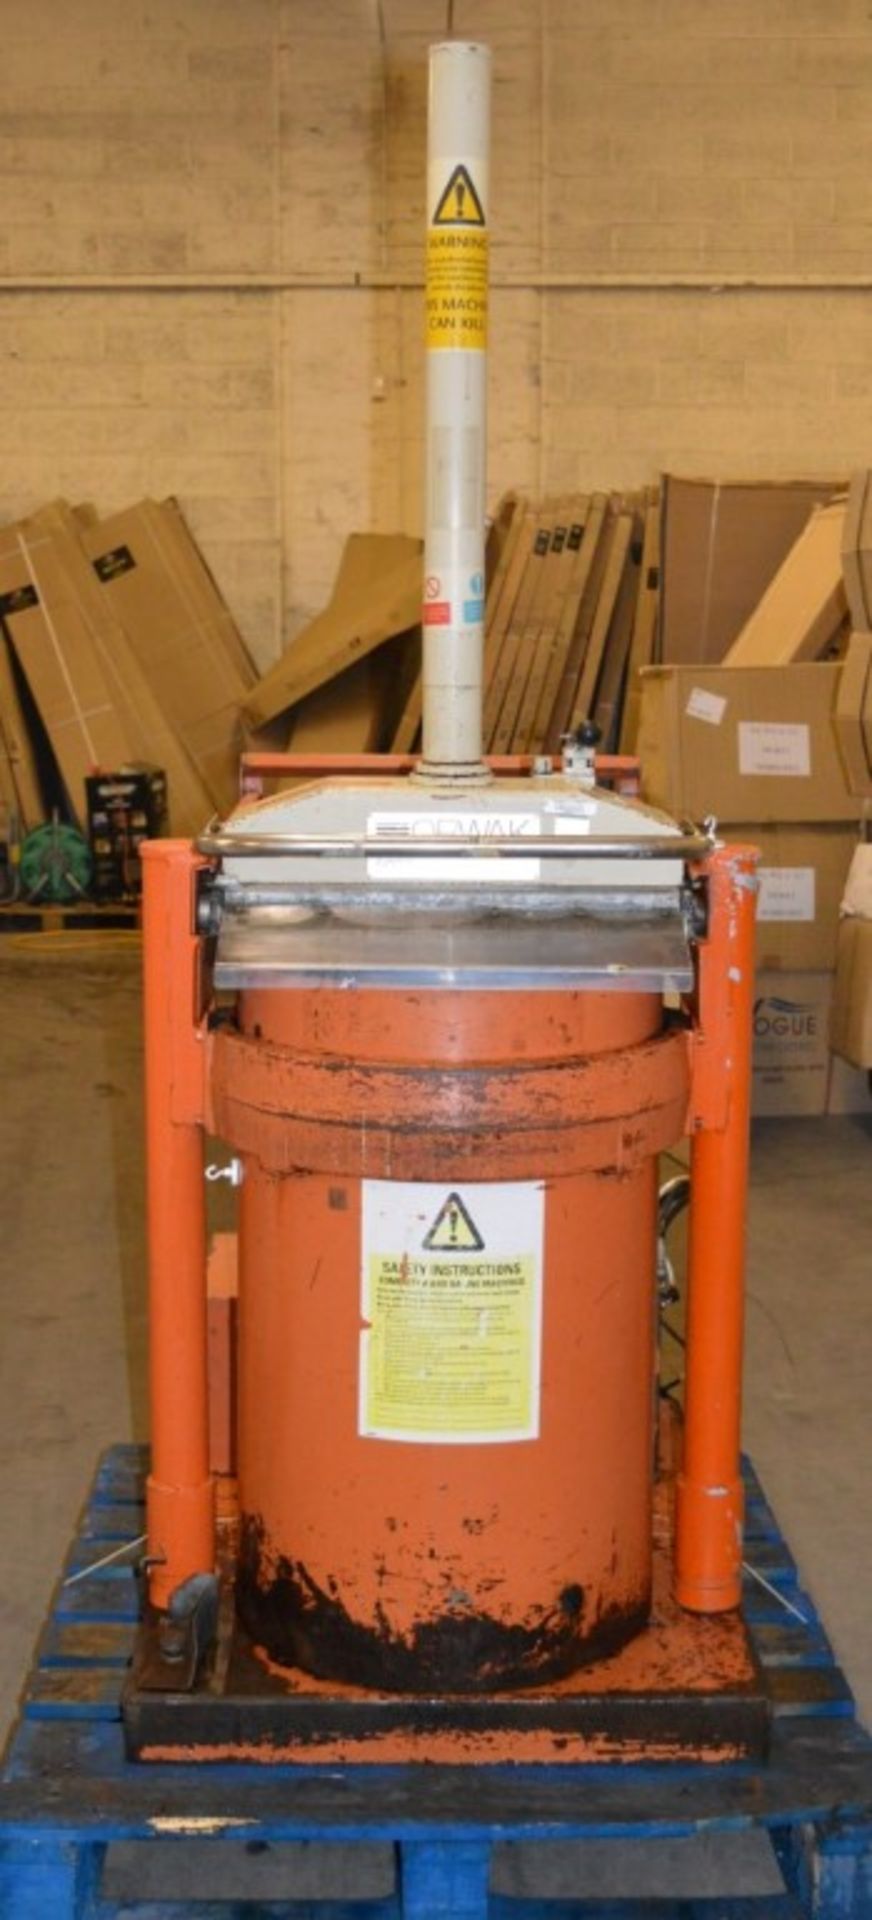 1 x Orwak 5030 Waste Compactor - Fully Tested and Working - Location: Bolton BL1 - Image 2 of 5